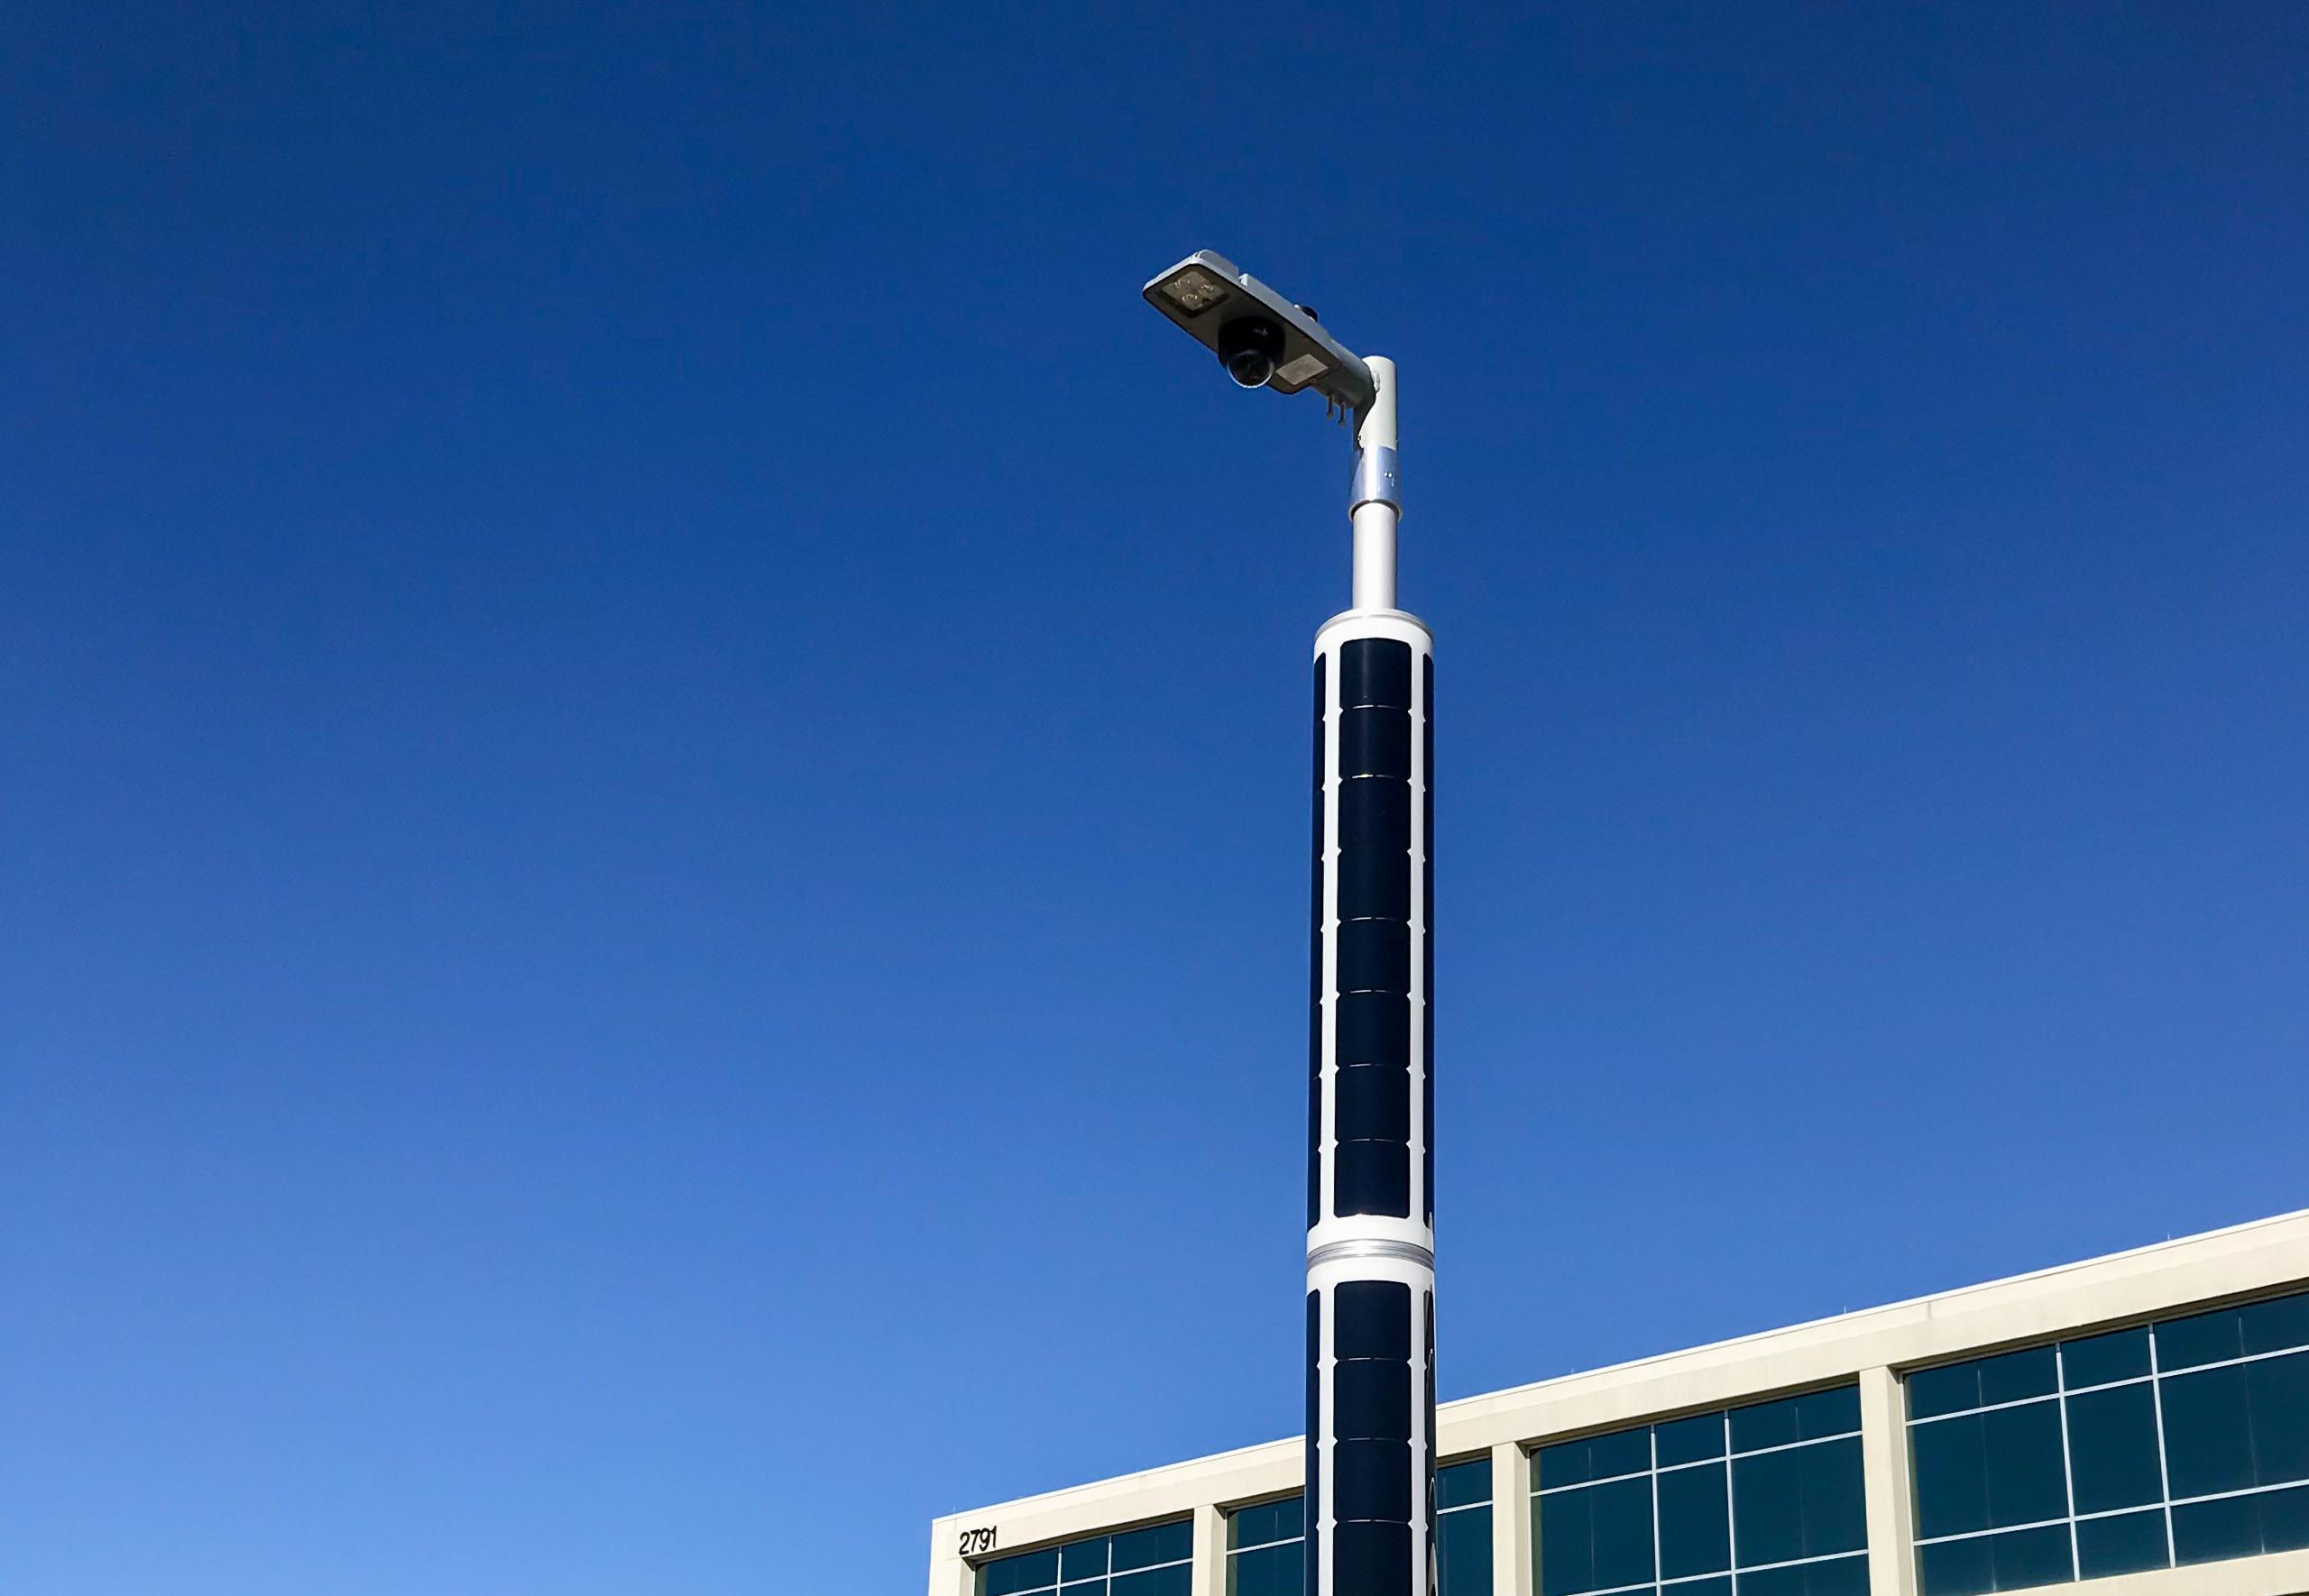 Both solar powered light and a security camera on 1 Soluxio pole